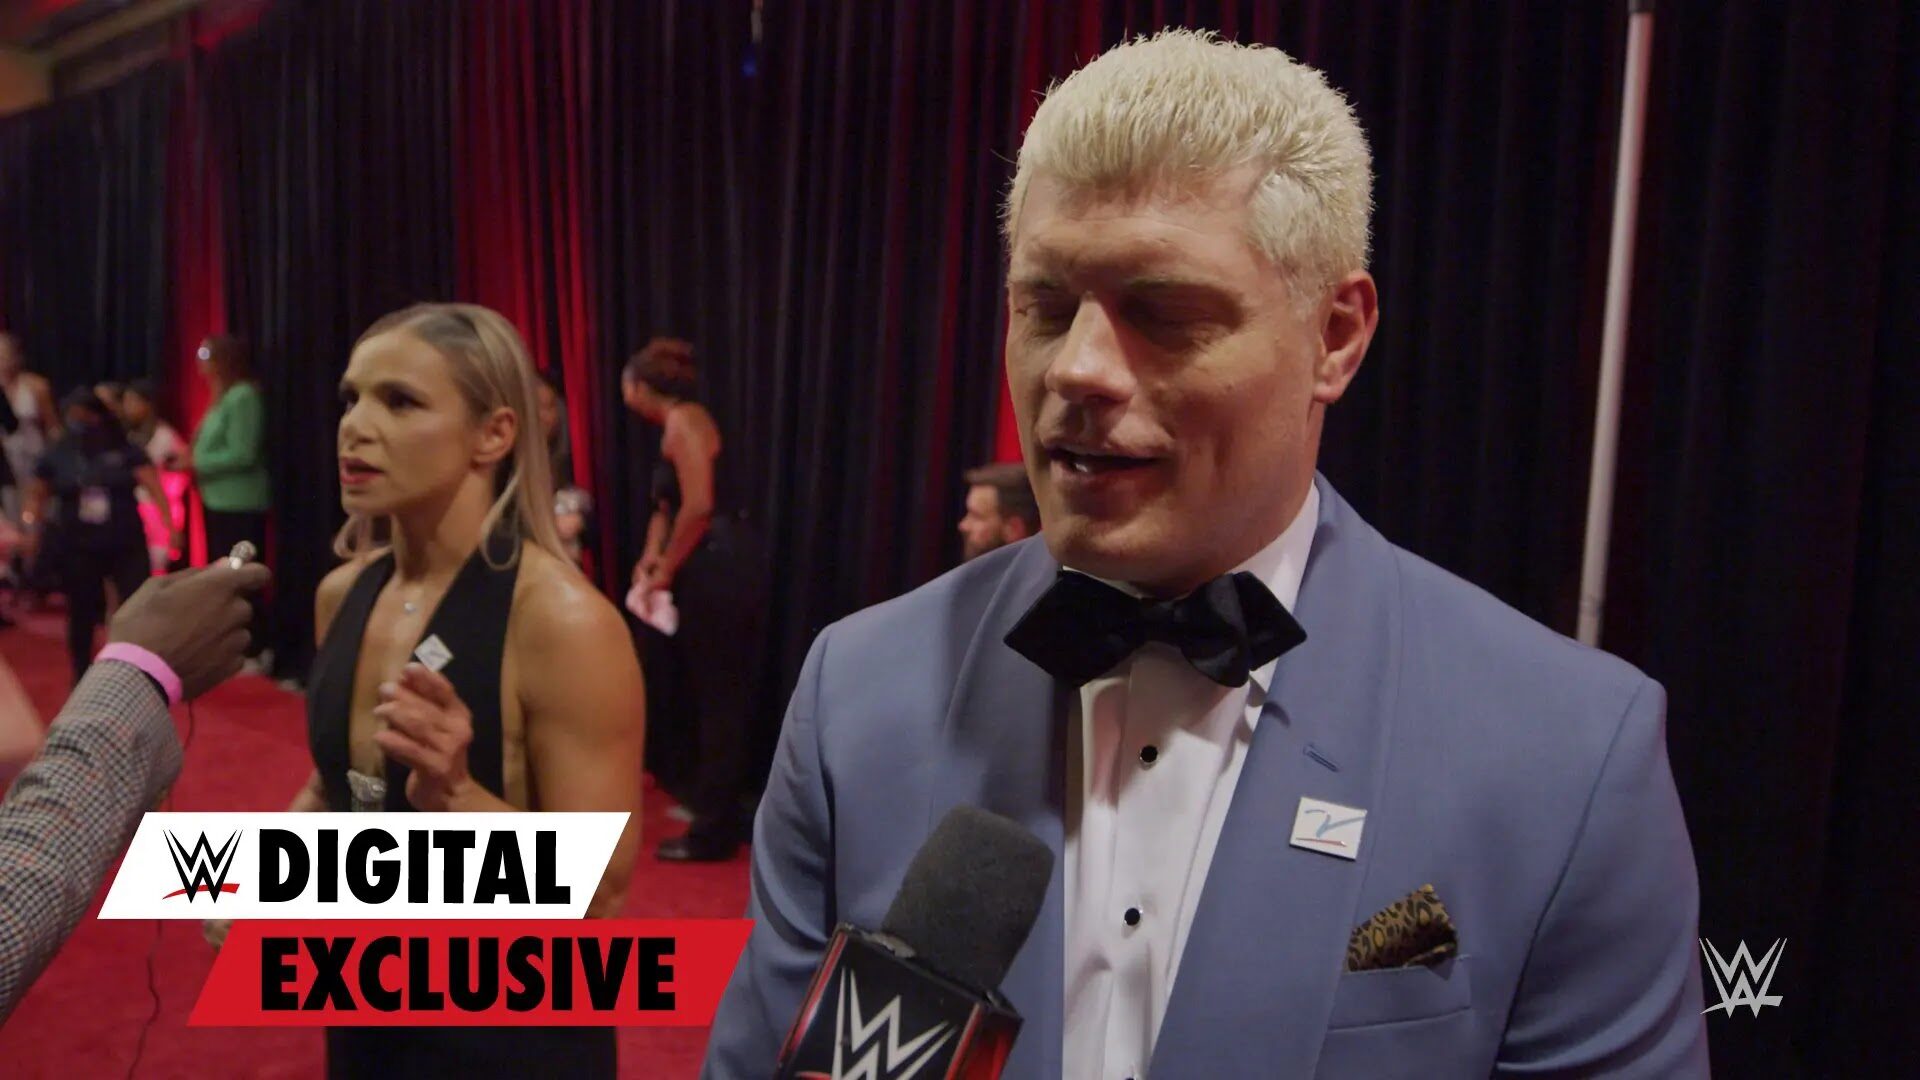 WATCH: Cody Rhodes Comments After Winning ESPY Award For WWE Moment Of The Year